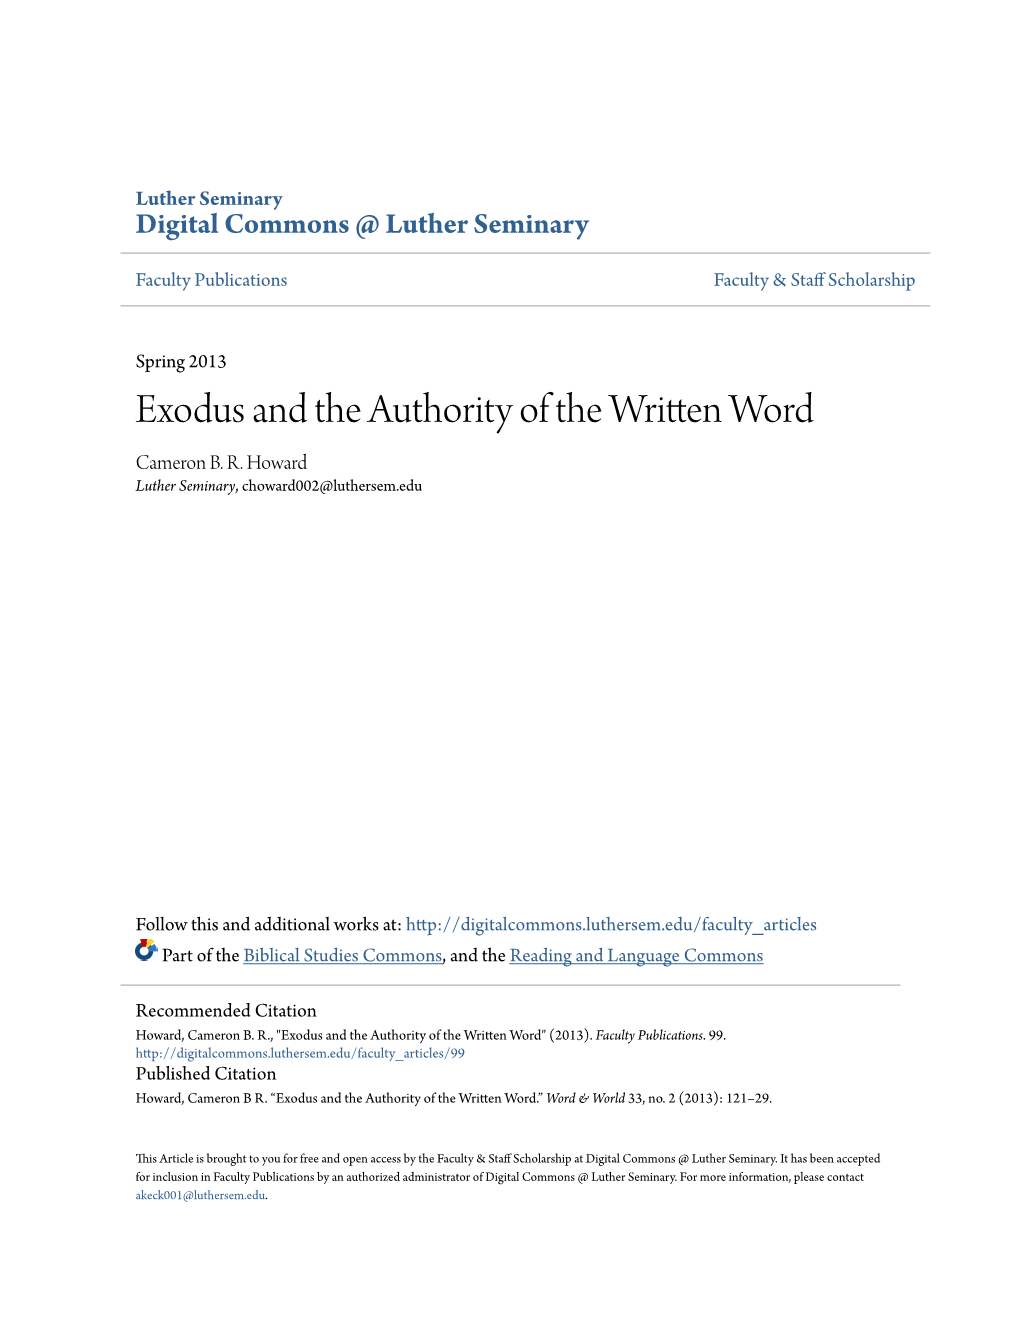 Exodus and the Authority of the Written Word Cameron B